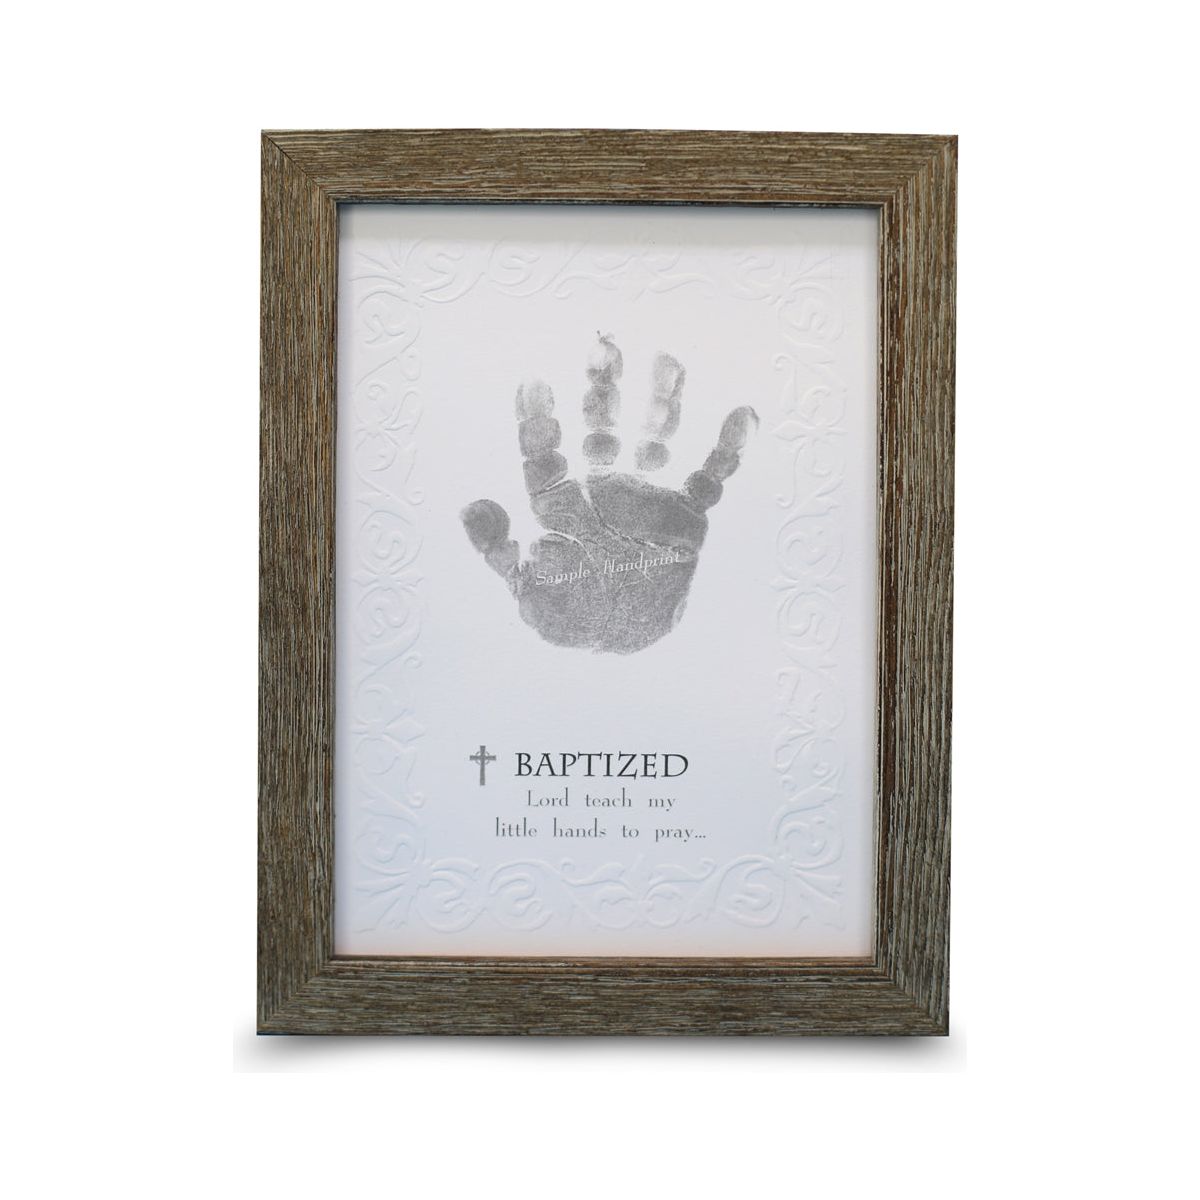 5x7 farmhouse frame with "Baptized" Sentiment on embossed cardstock with space for a child's handprint.